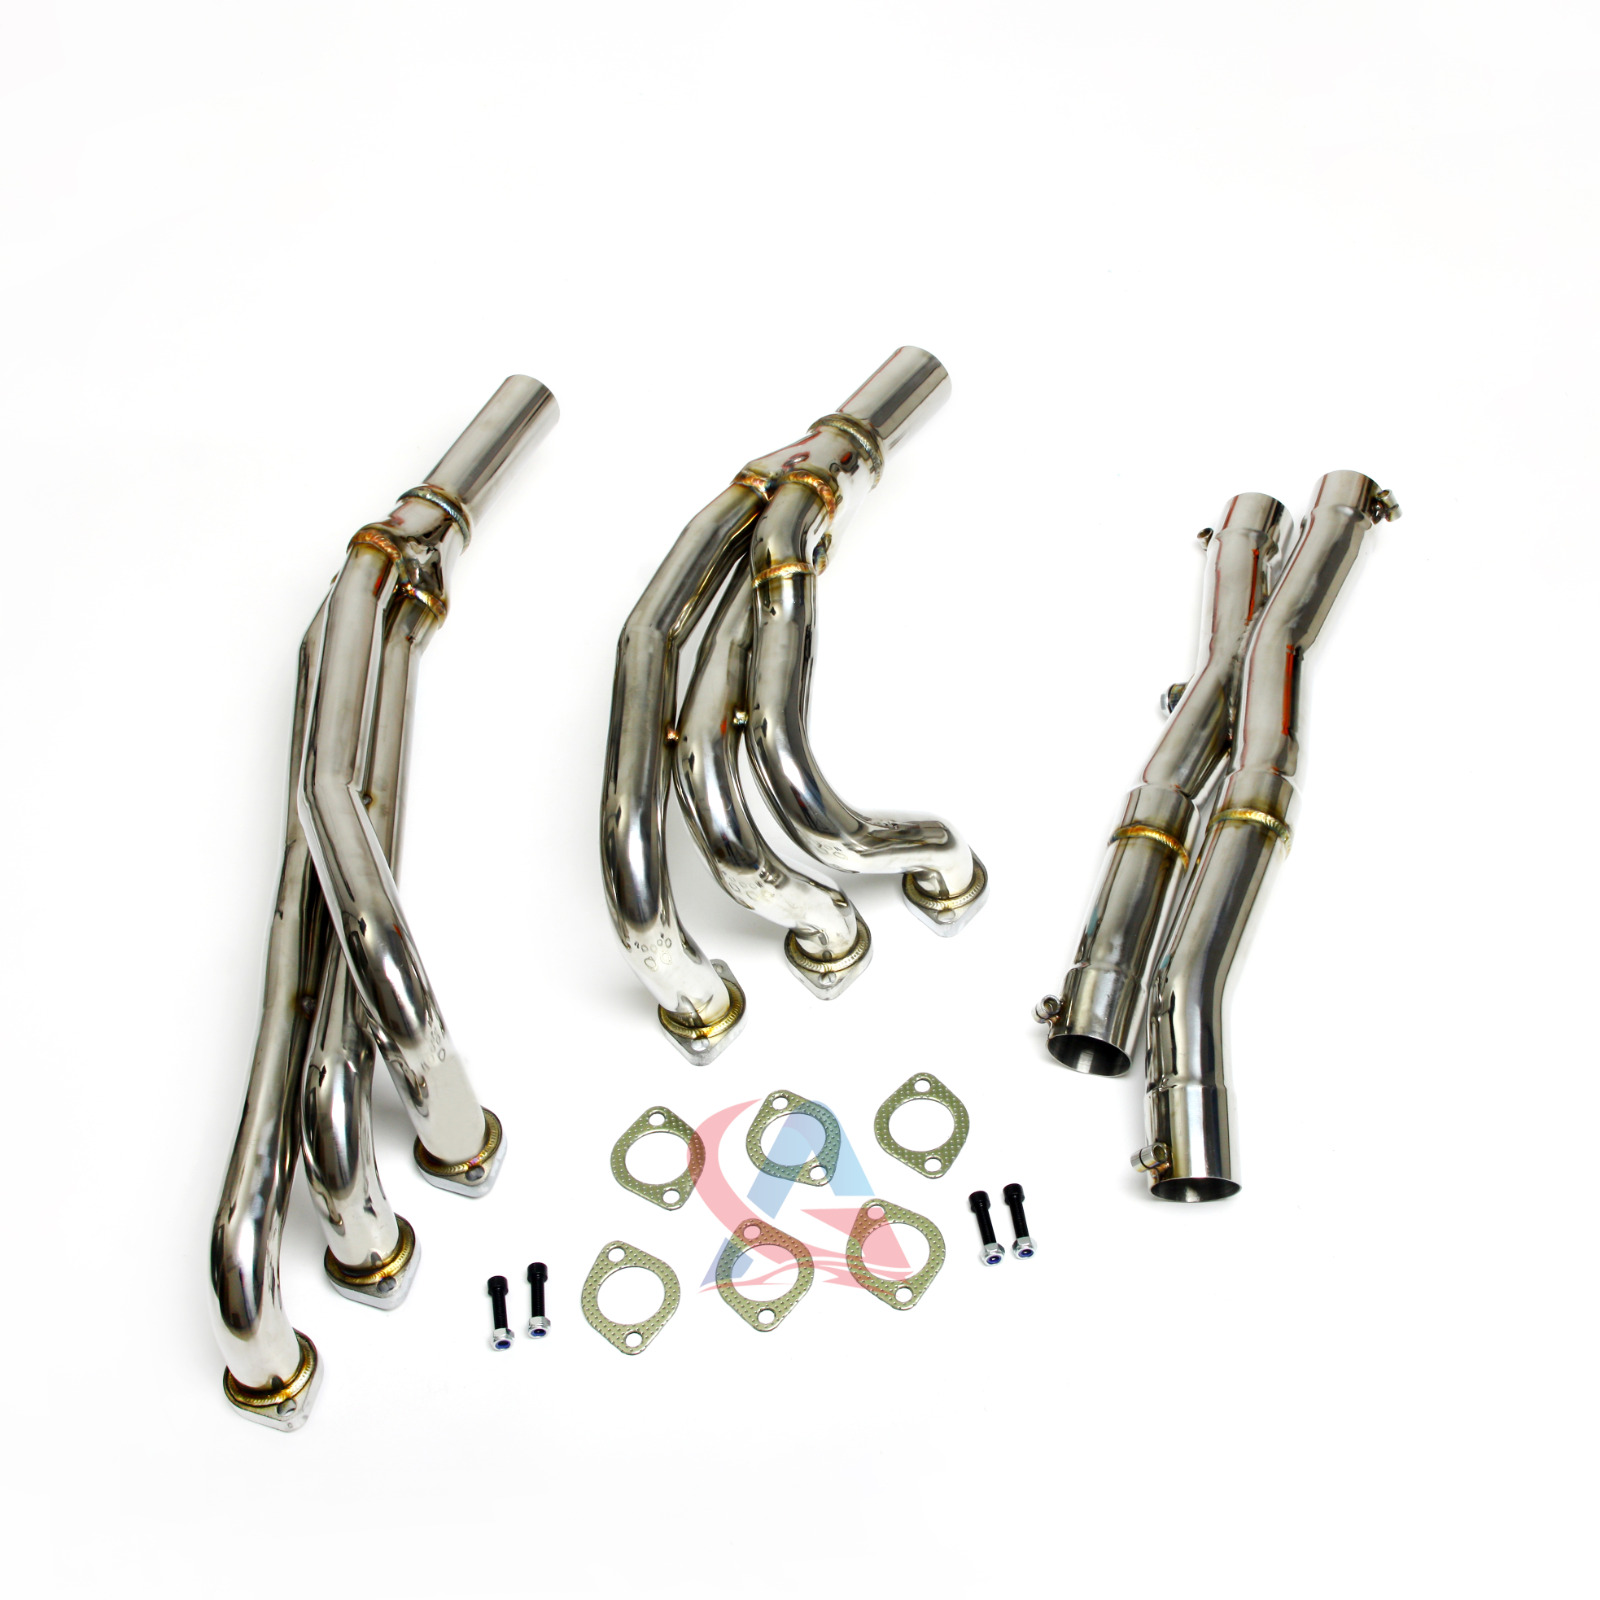 Long Exhaust Manifolds for Bmw E30 E34 All 6cyl M20 Models Left Hand Sport